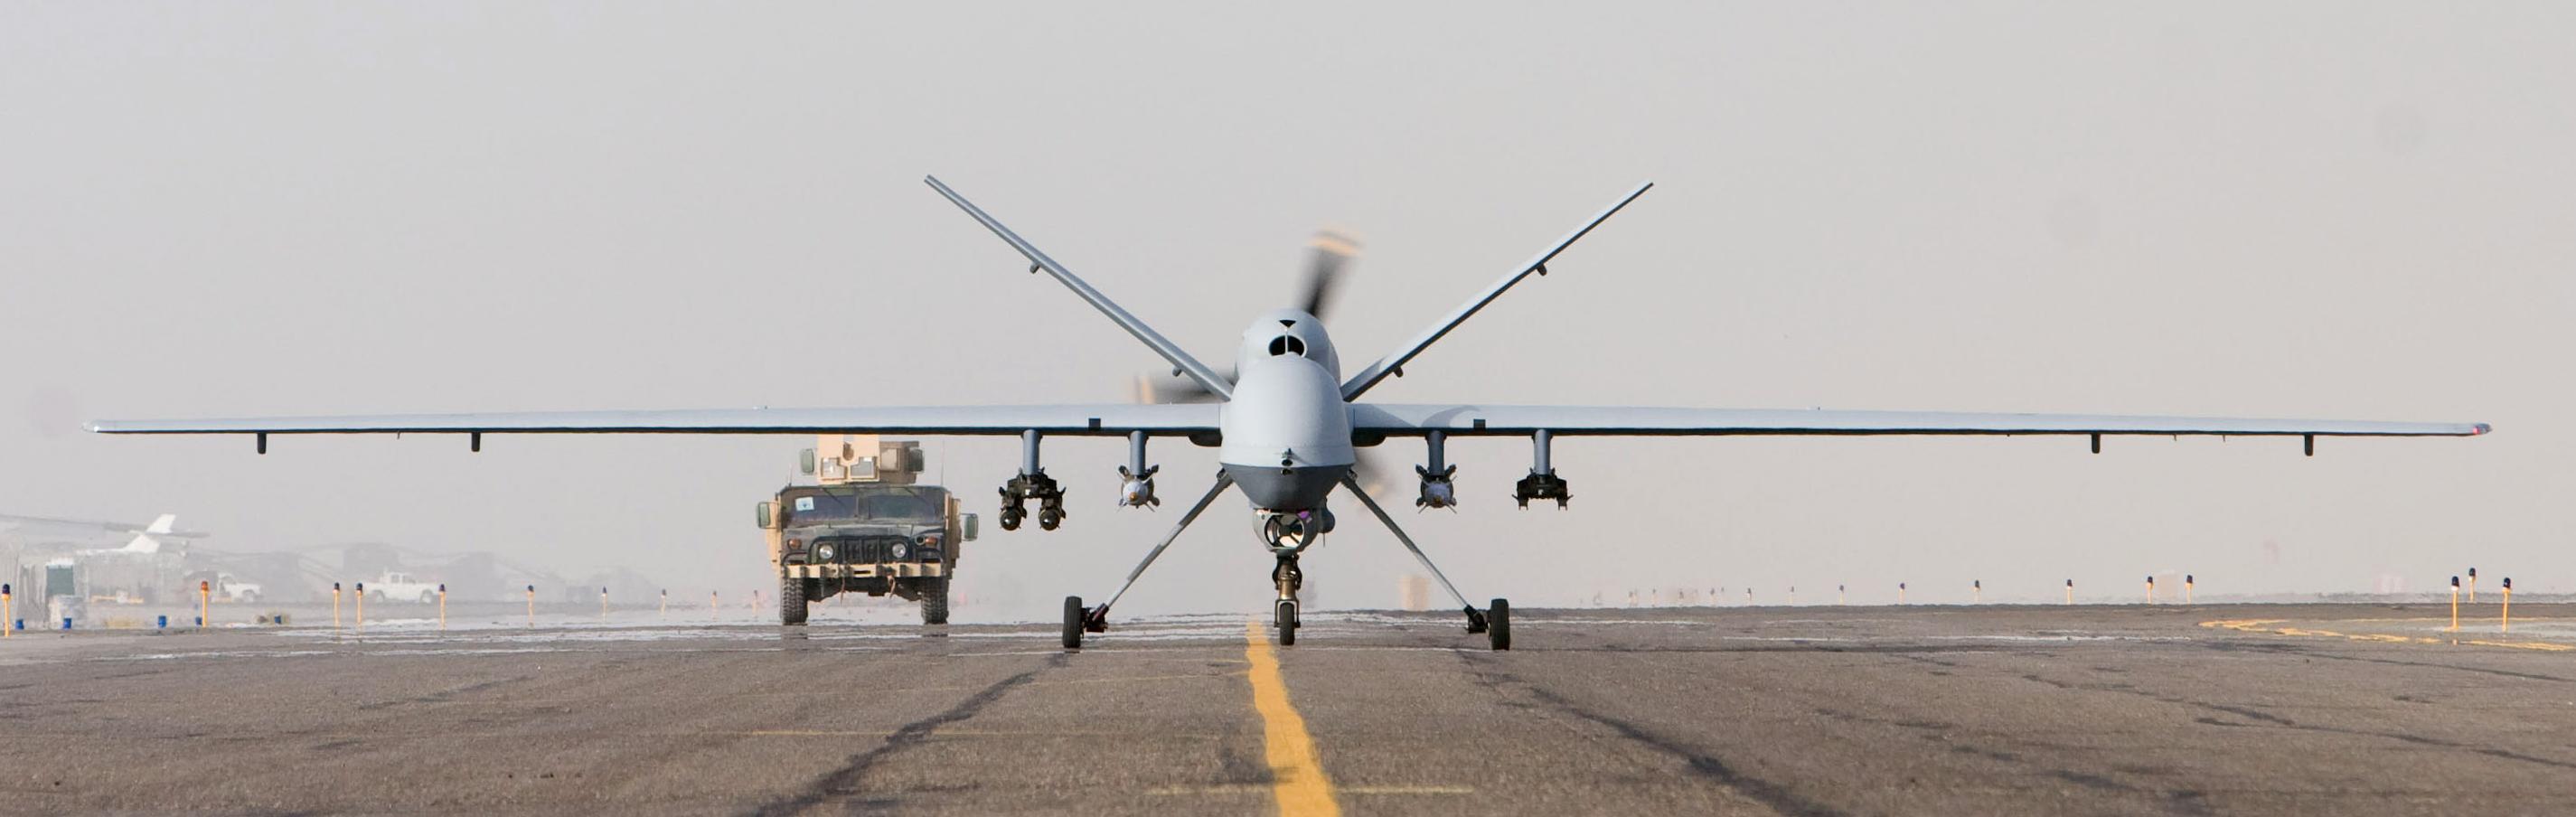 Drone strikes leaving from Sigonella?